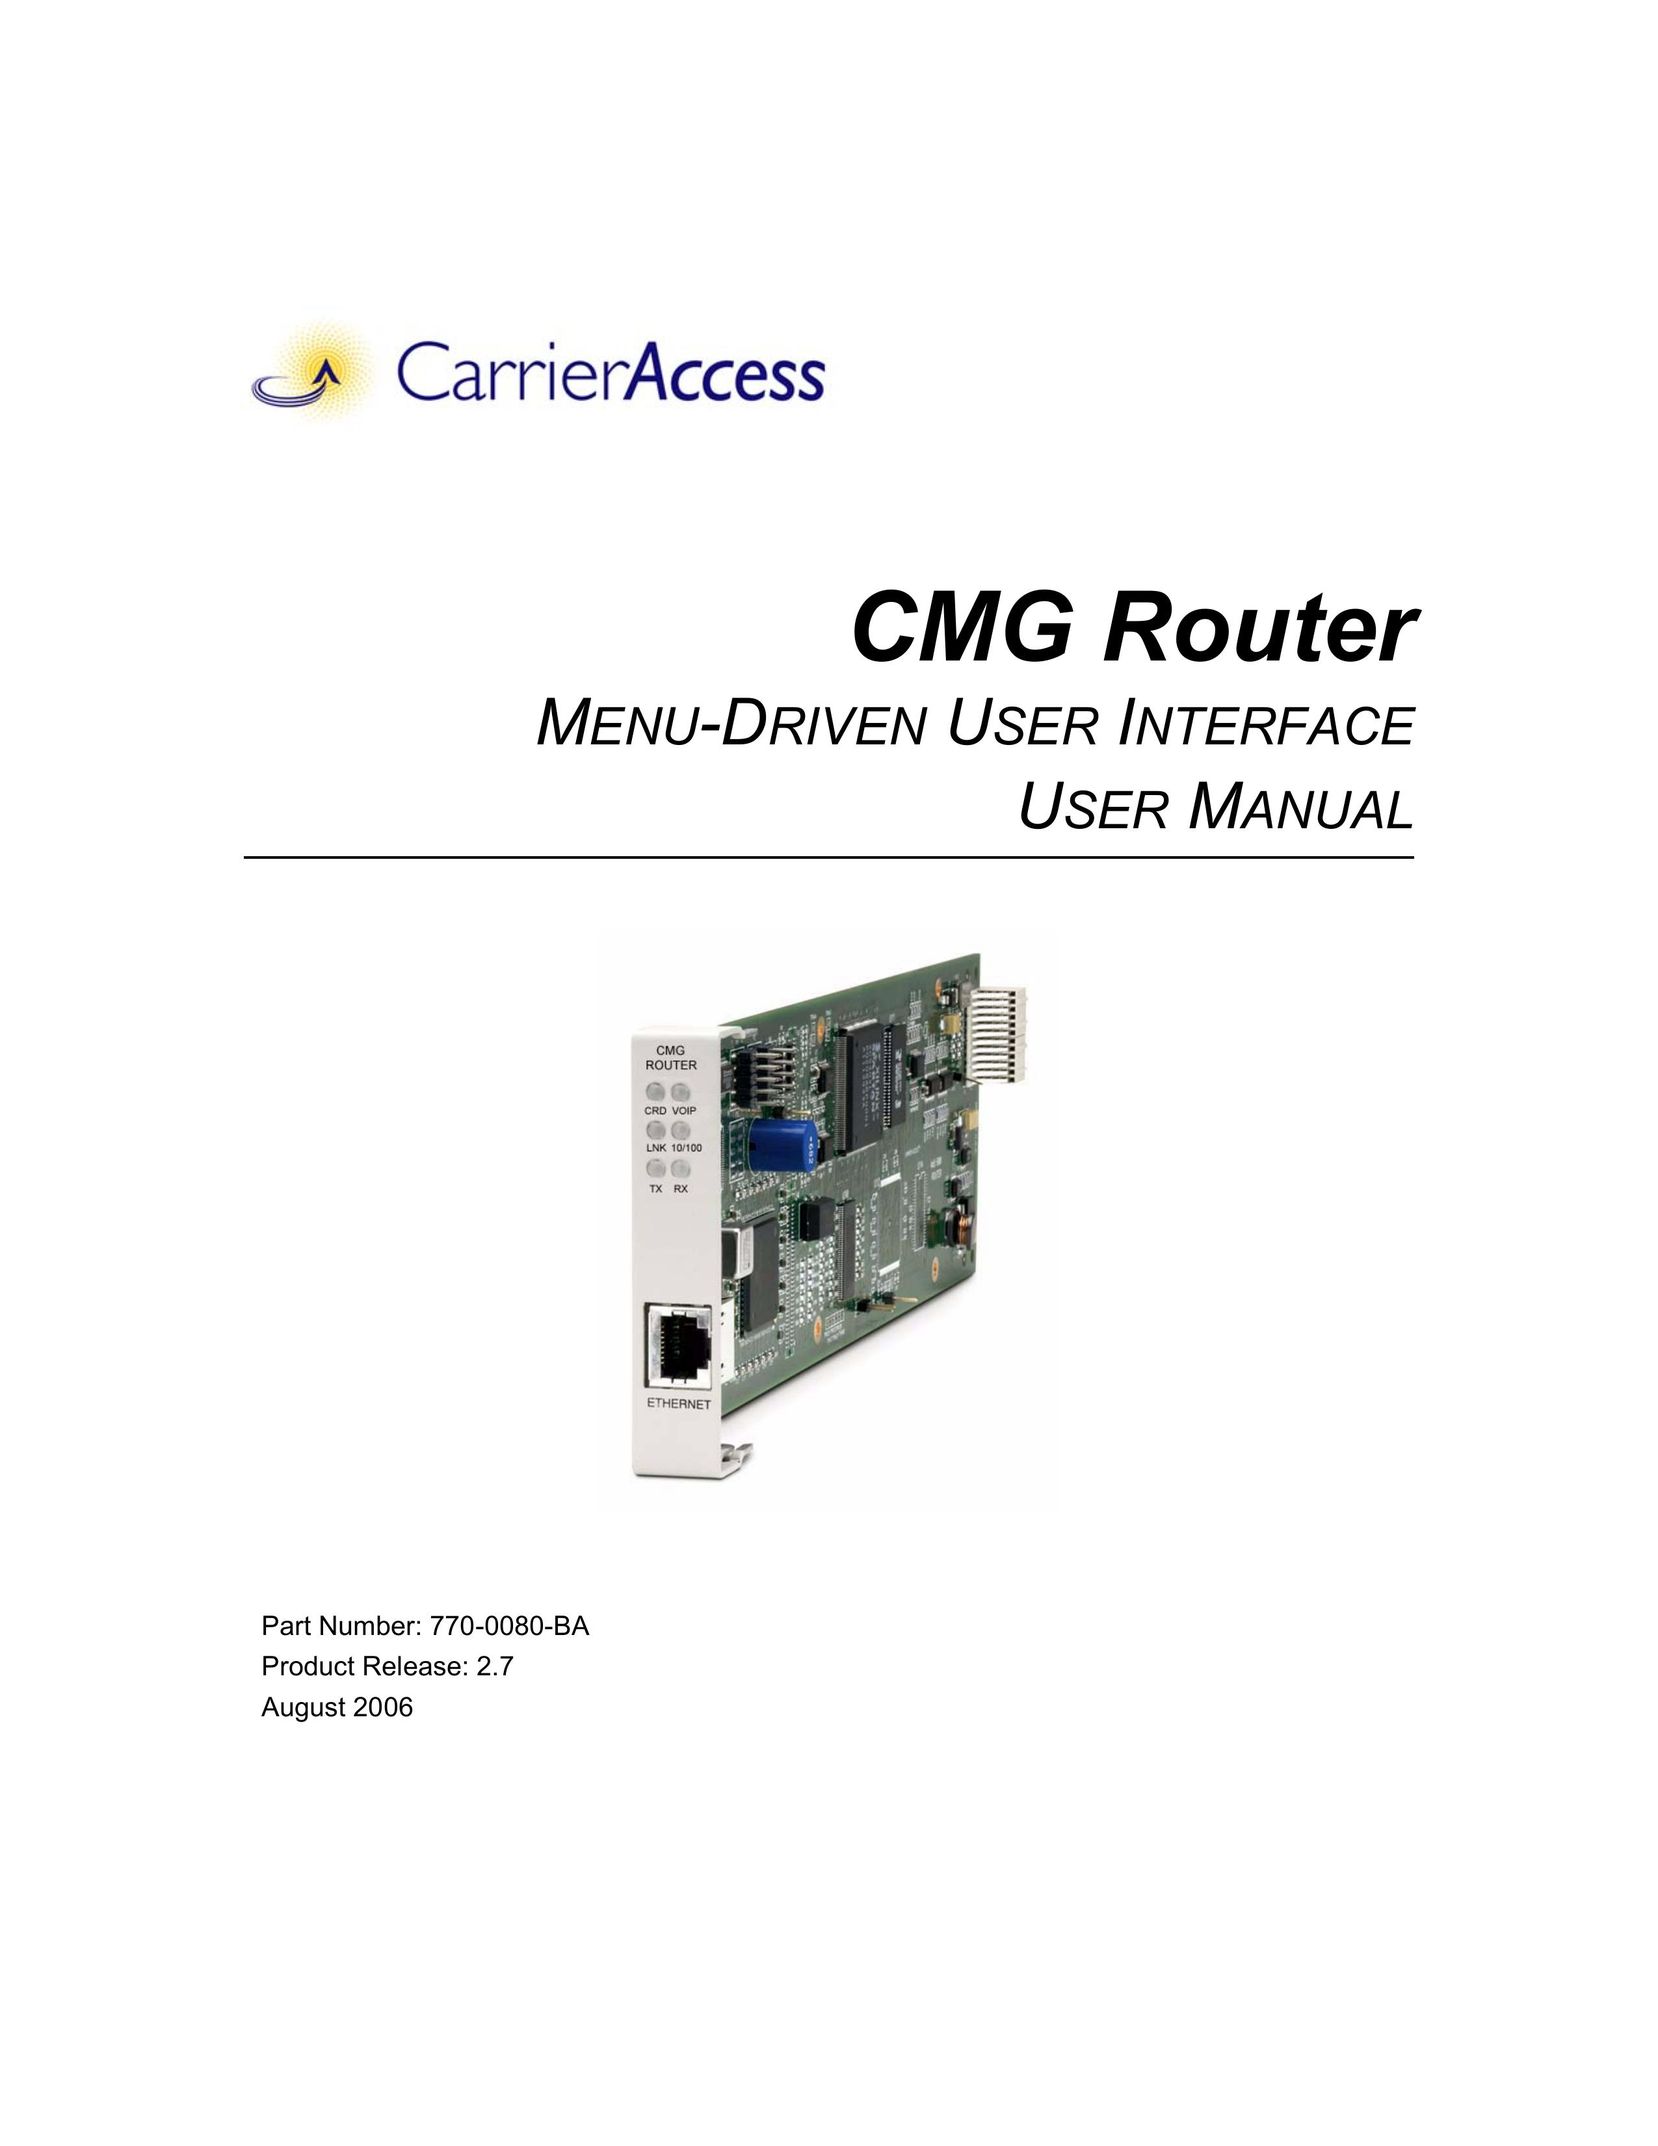 Carrier Access CMG Router Network Router User Manual